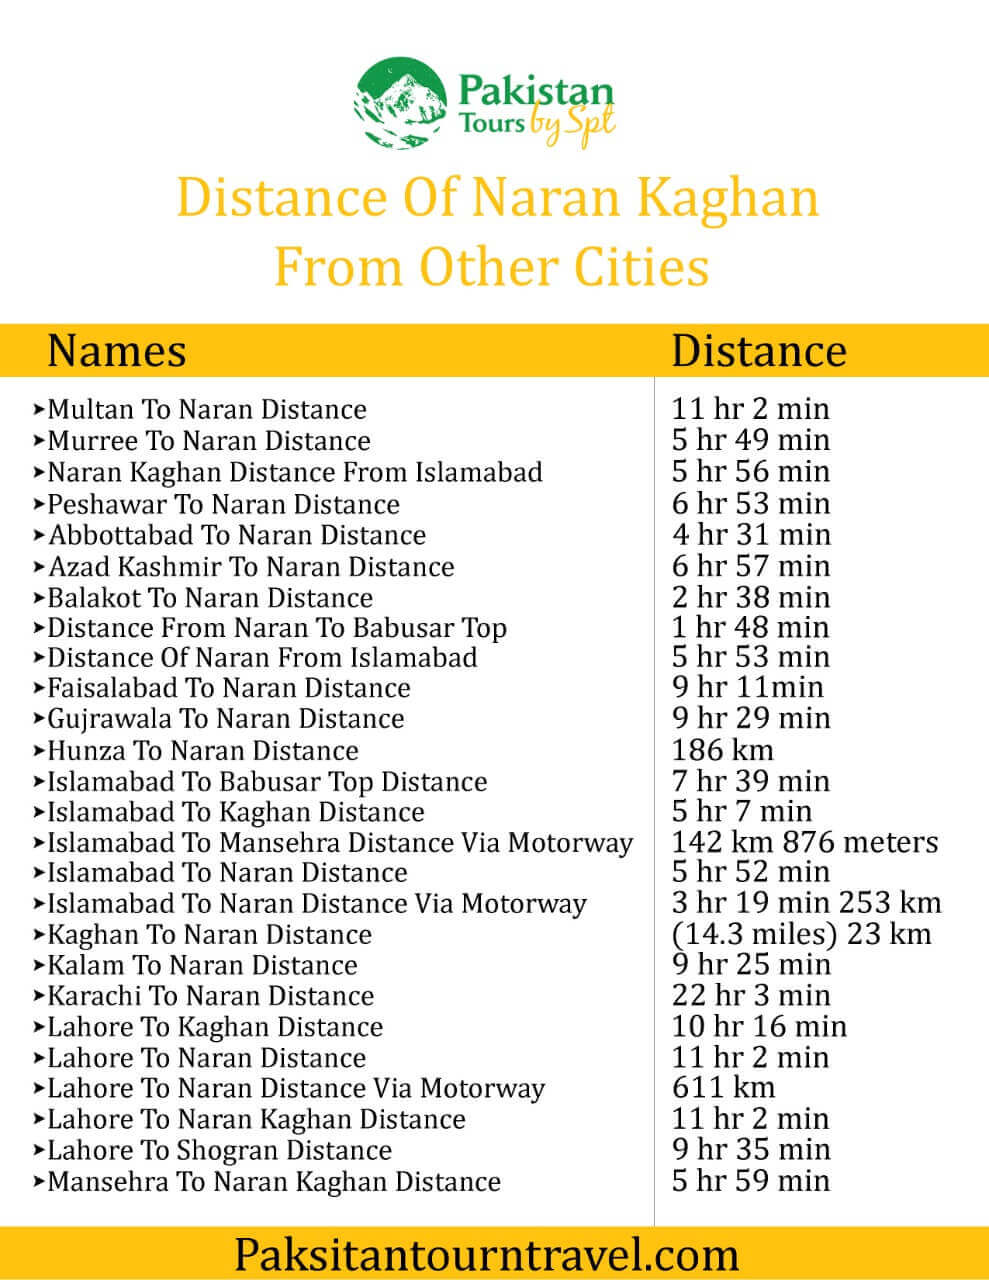 Complete detail of distance of Naran from other cities.